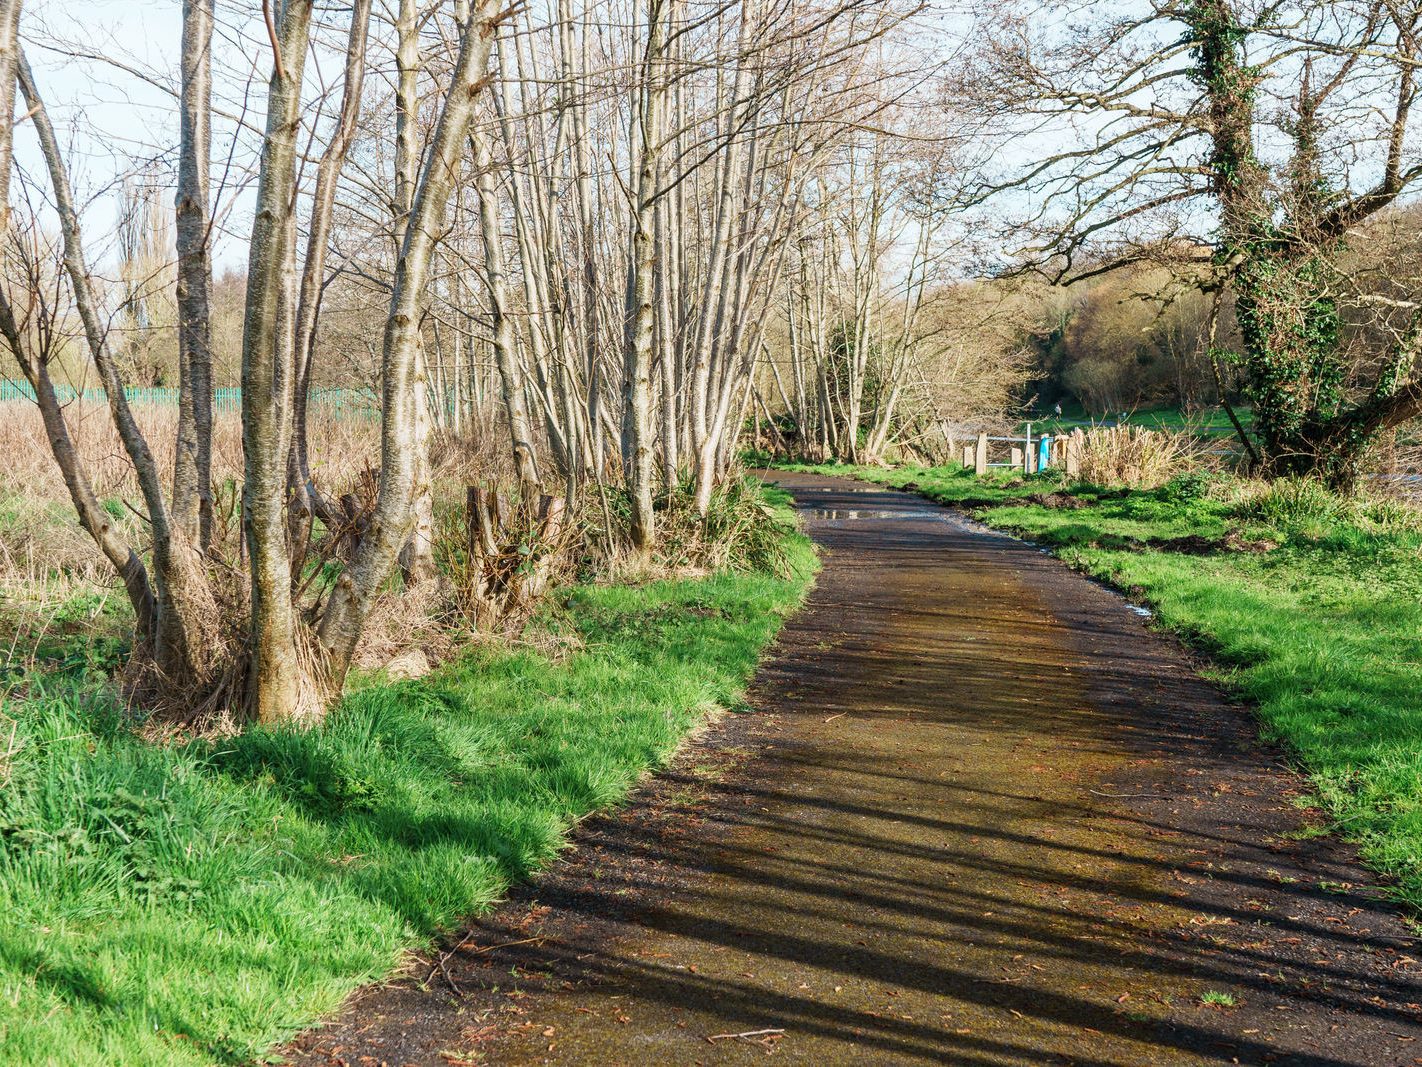 LIFFEY VALLEY PARK AT CHAPELIZOD ON THE NORTH SIDE OF THE RIVER [ACROSS THE ROAD FROM THE ENTRANCE TO PHOENIX PARK]-223361-1